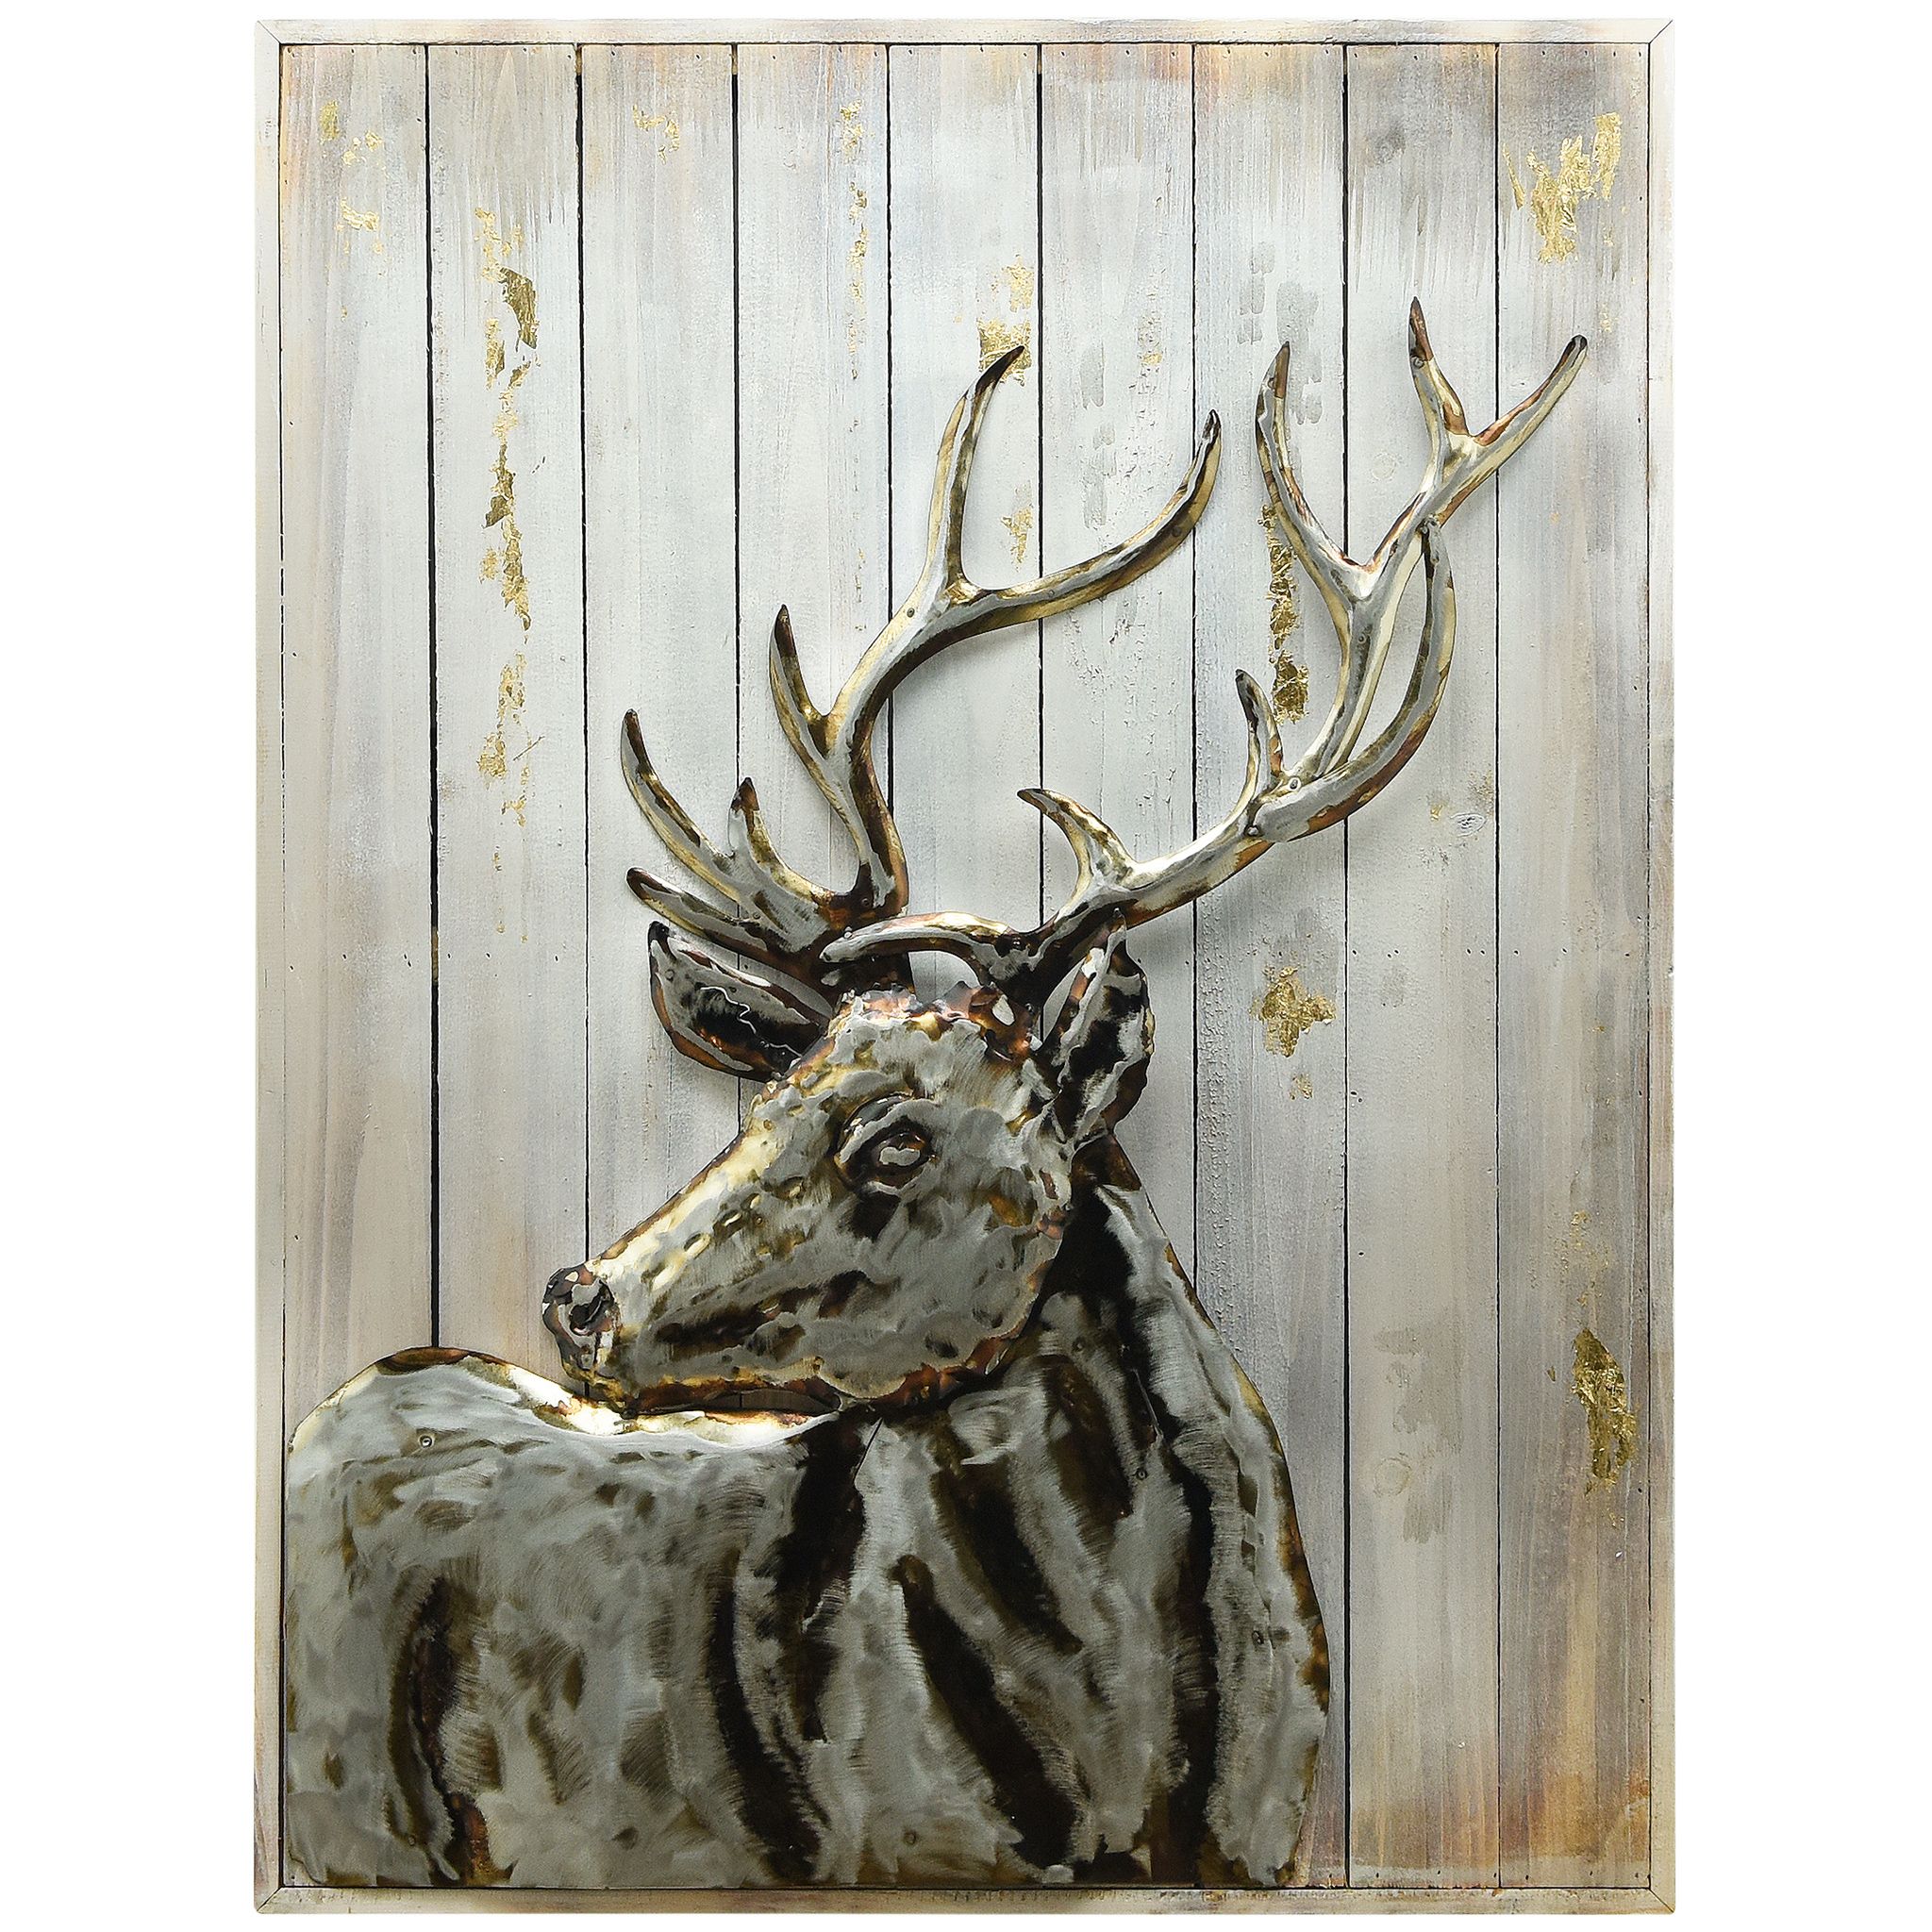 Empire Art Direct Deer 2 Hand Painted 3d Metal Wall Art On In Most Current Oak Wood Wall Art (View 6 of 20)